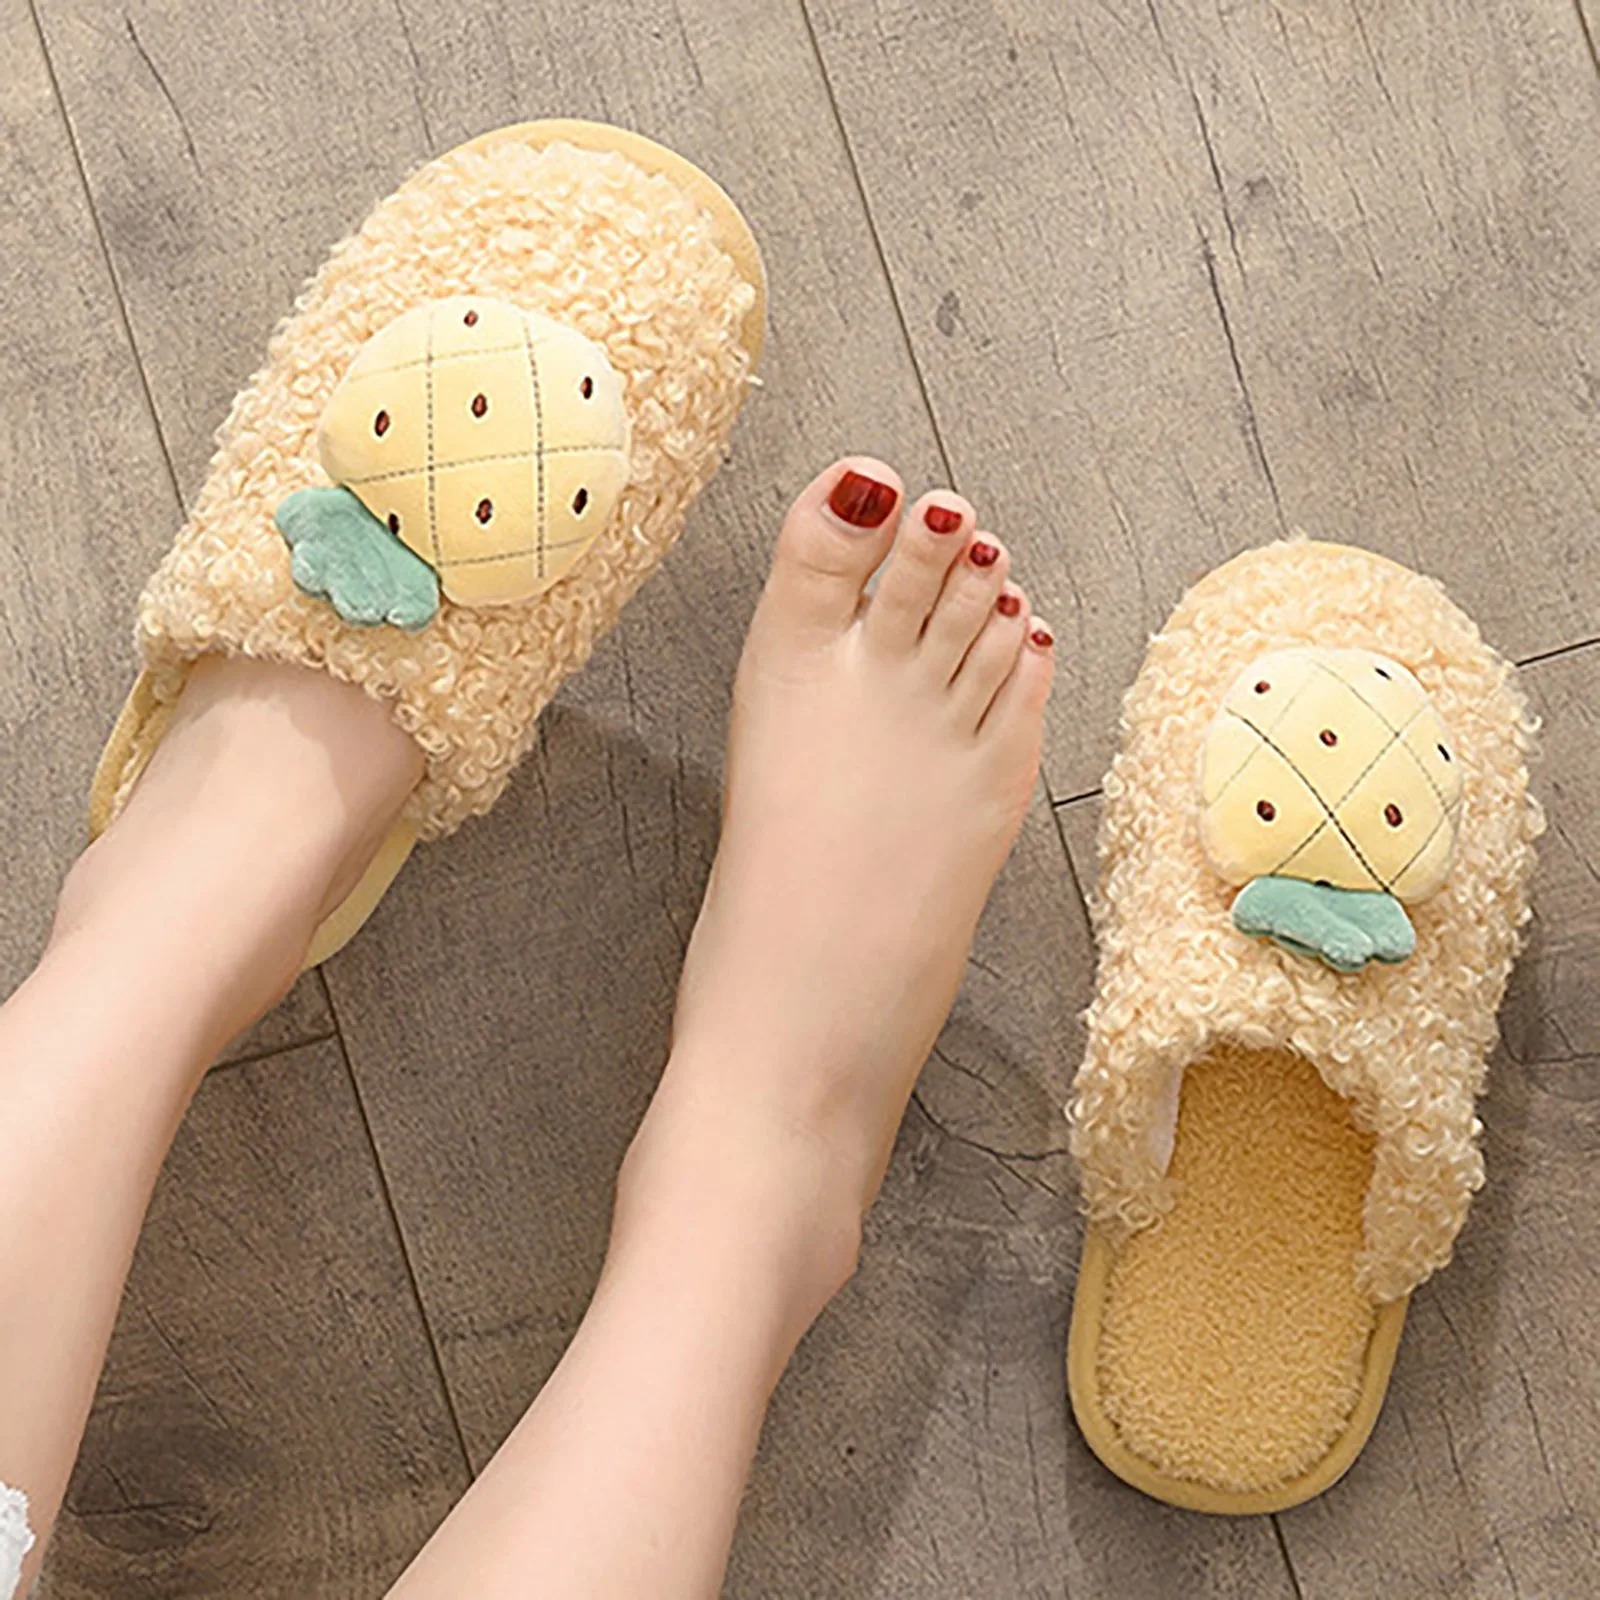 

Four Seasons Cute Slippers Fruit Winter Plush Slippers Closed Toe Slip On Flat House Shoes Cozy and Warm Home Floor Slippers